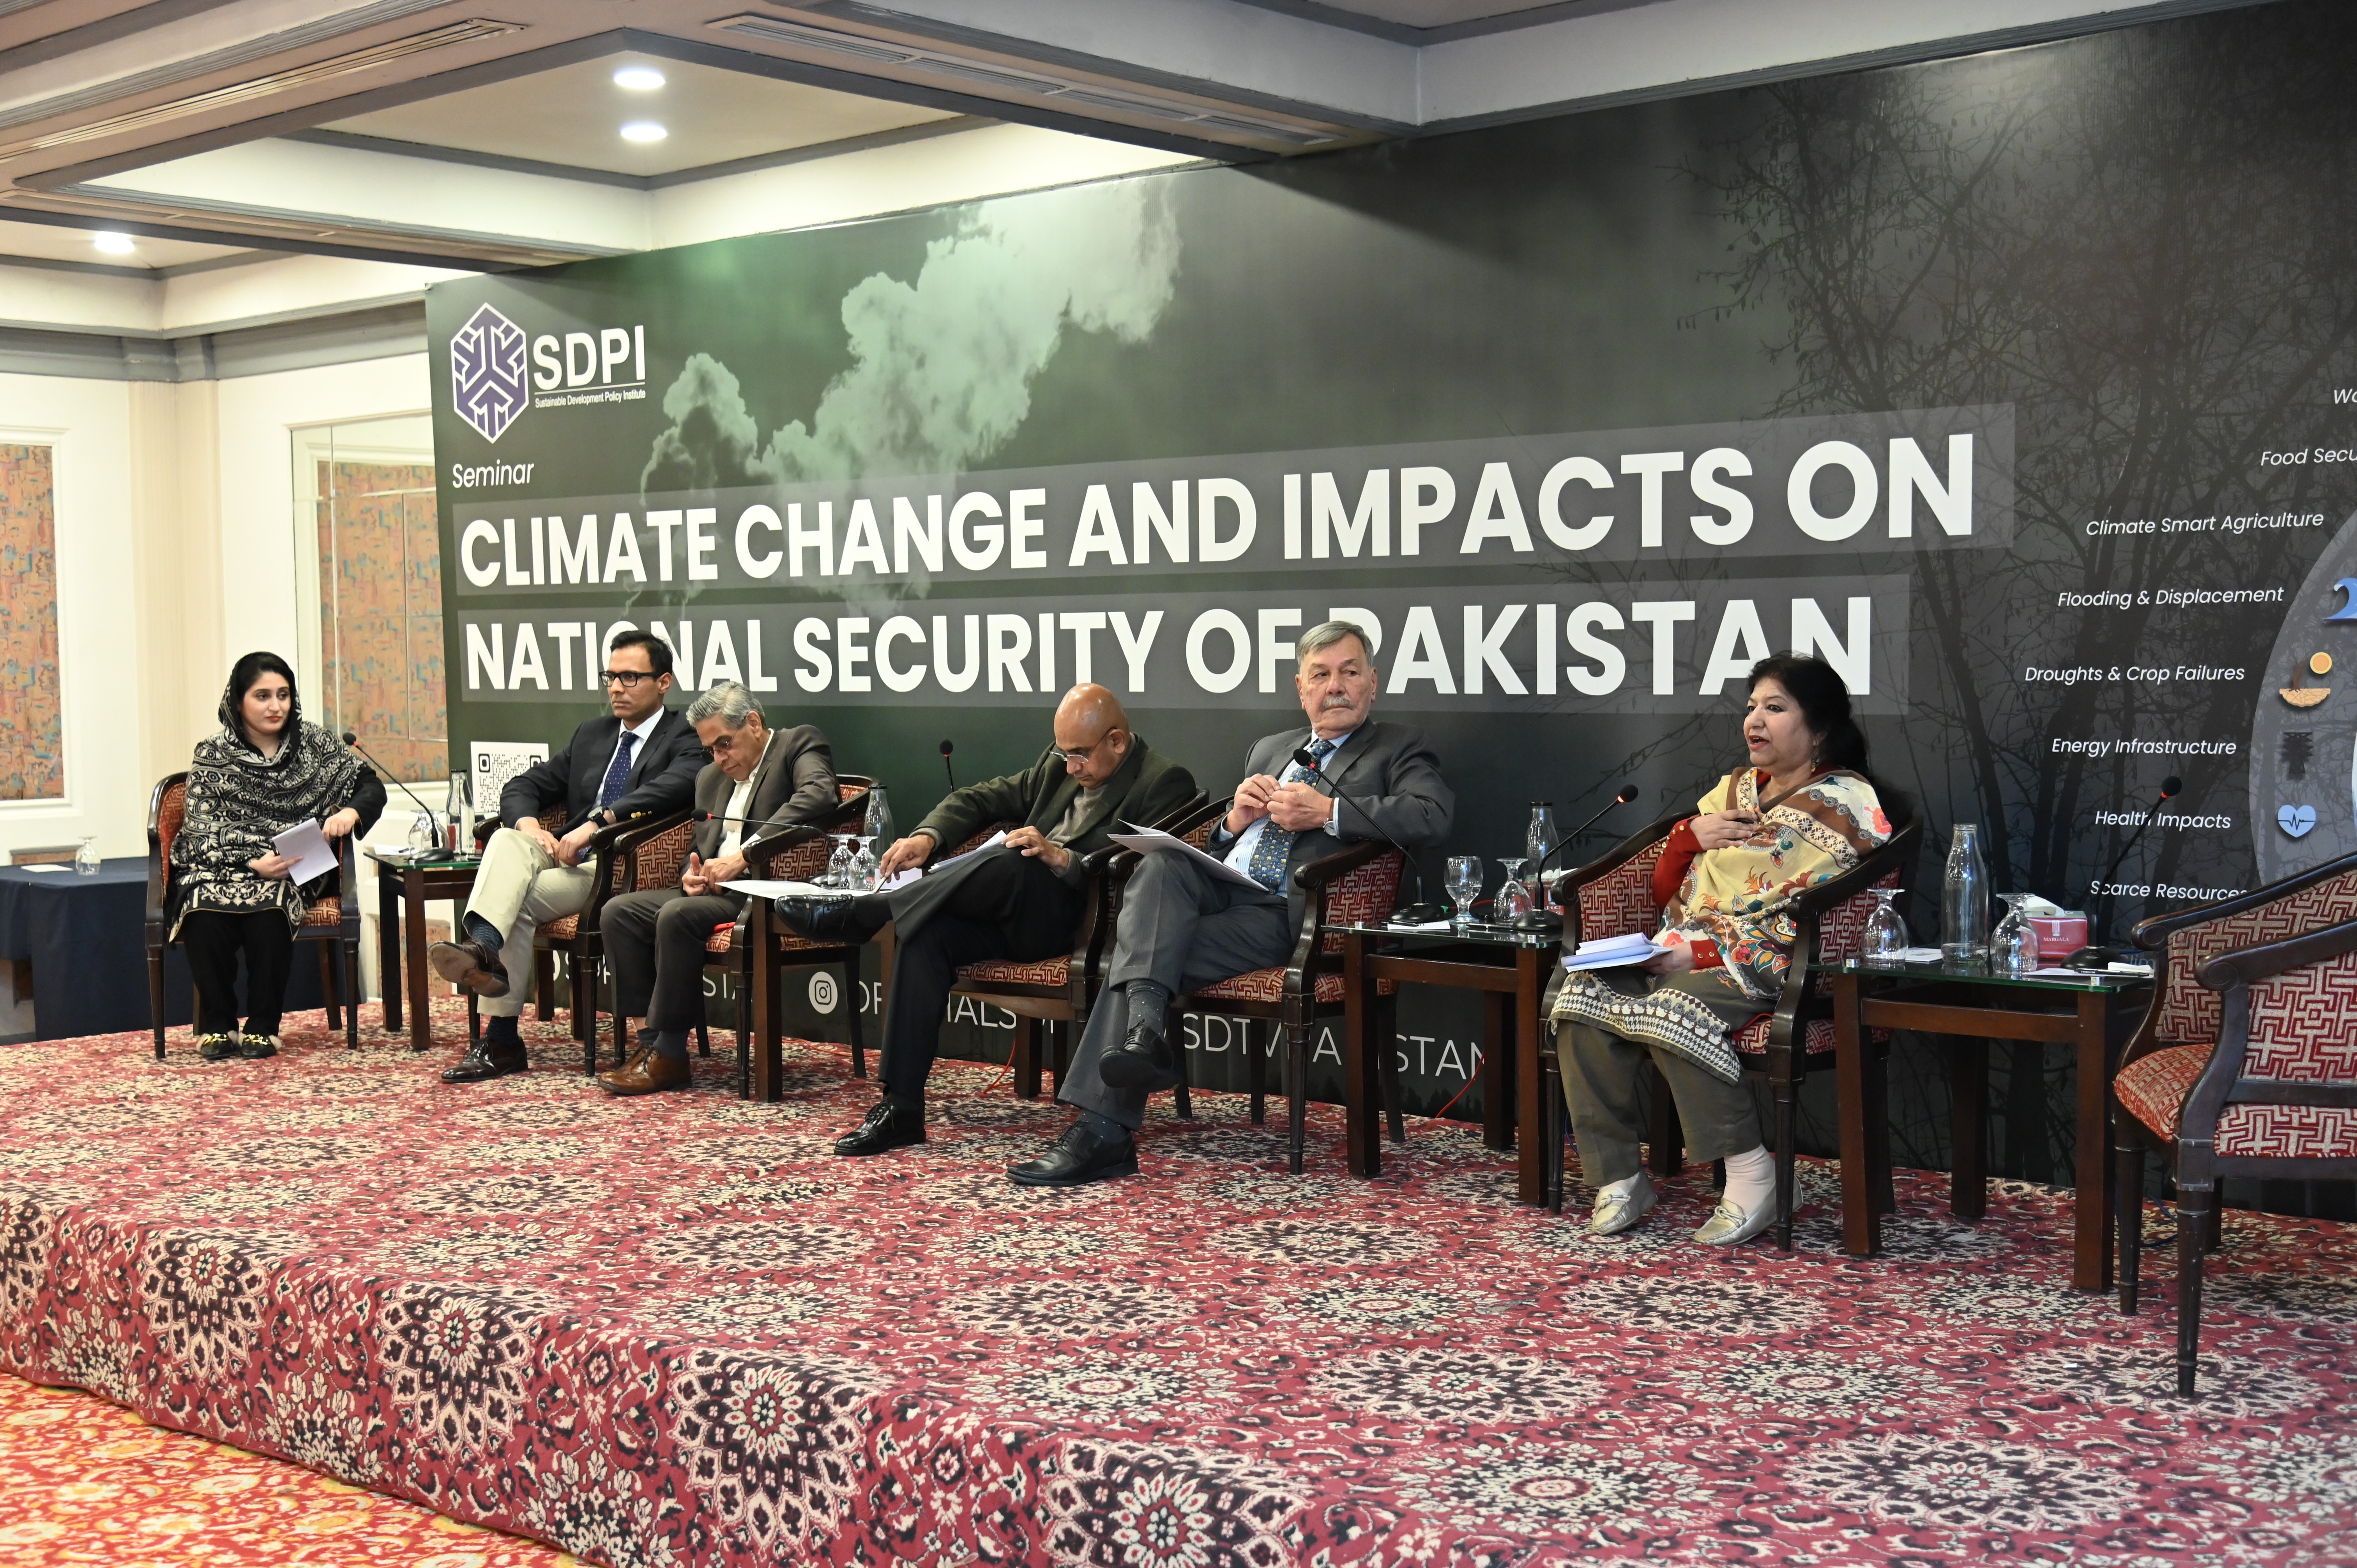 A panel discussion during the Seminar on Climate Change